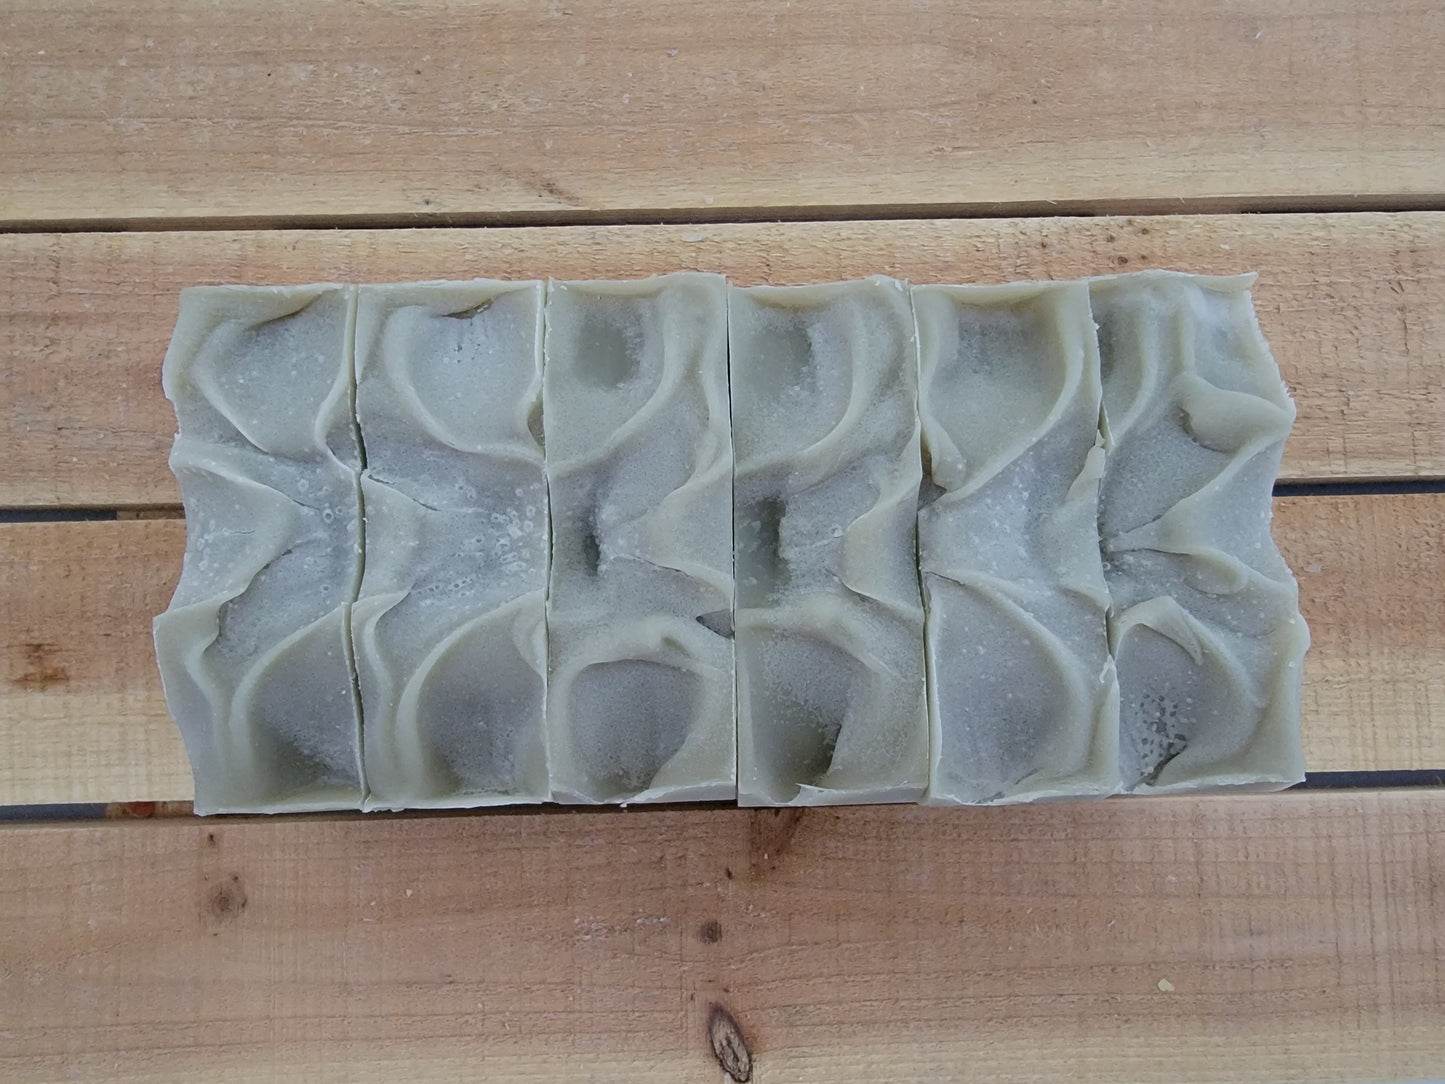 Rosemary and Peppermint Soap | Handmade and Natural | Sunflower Soaps